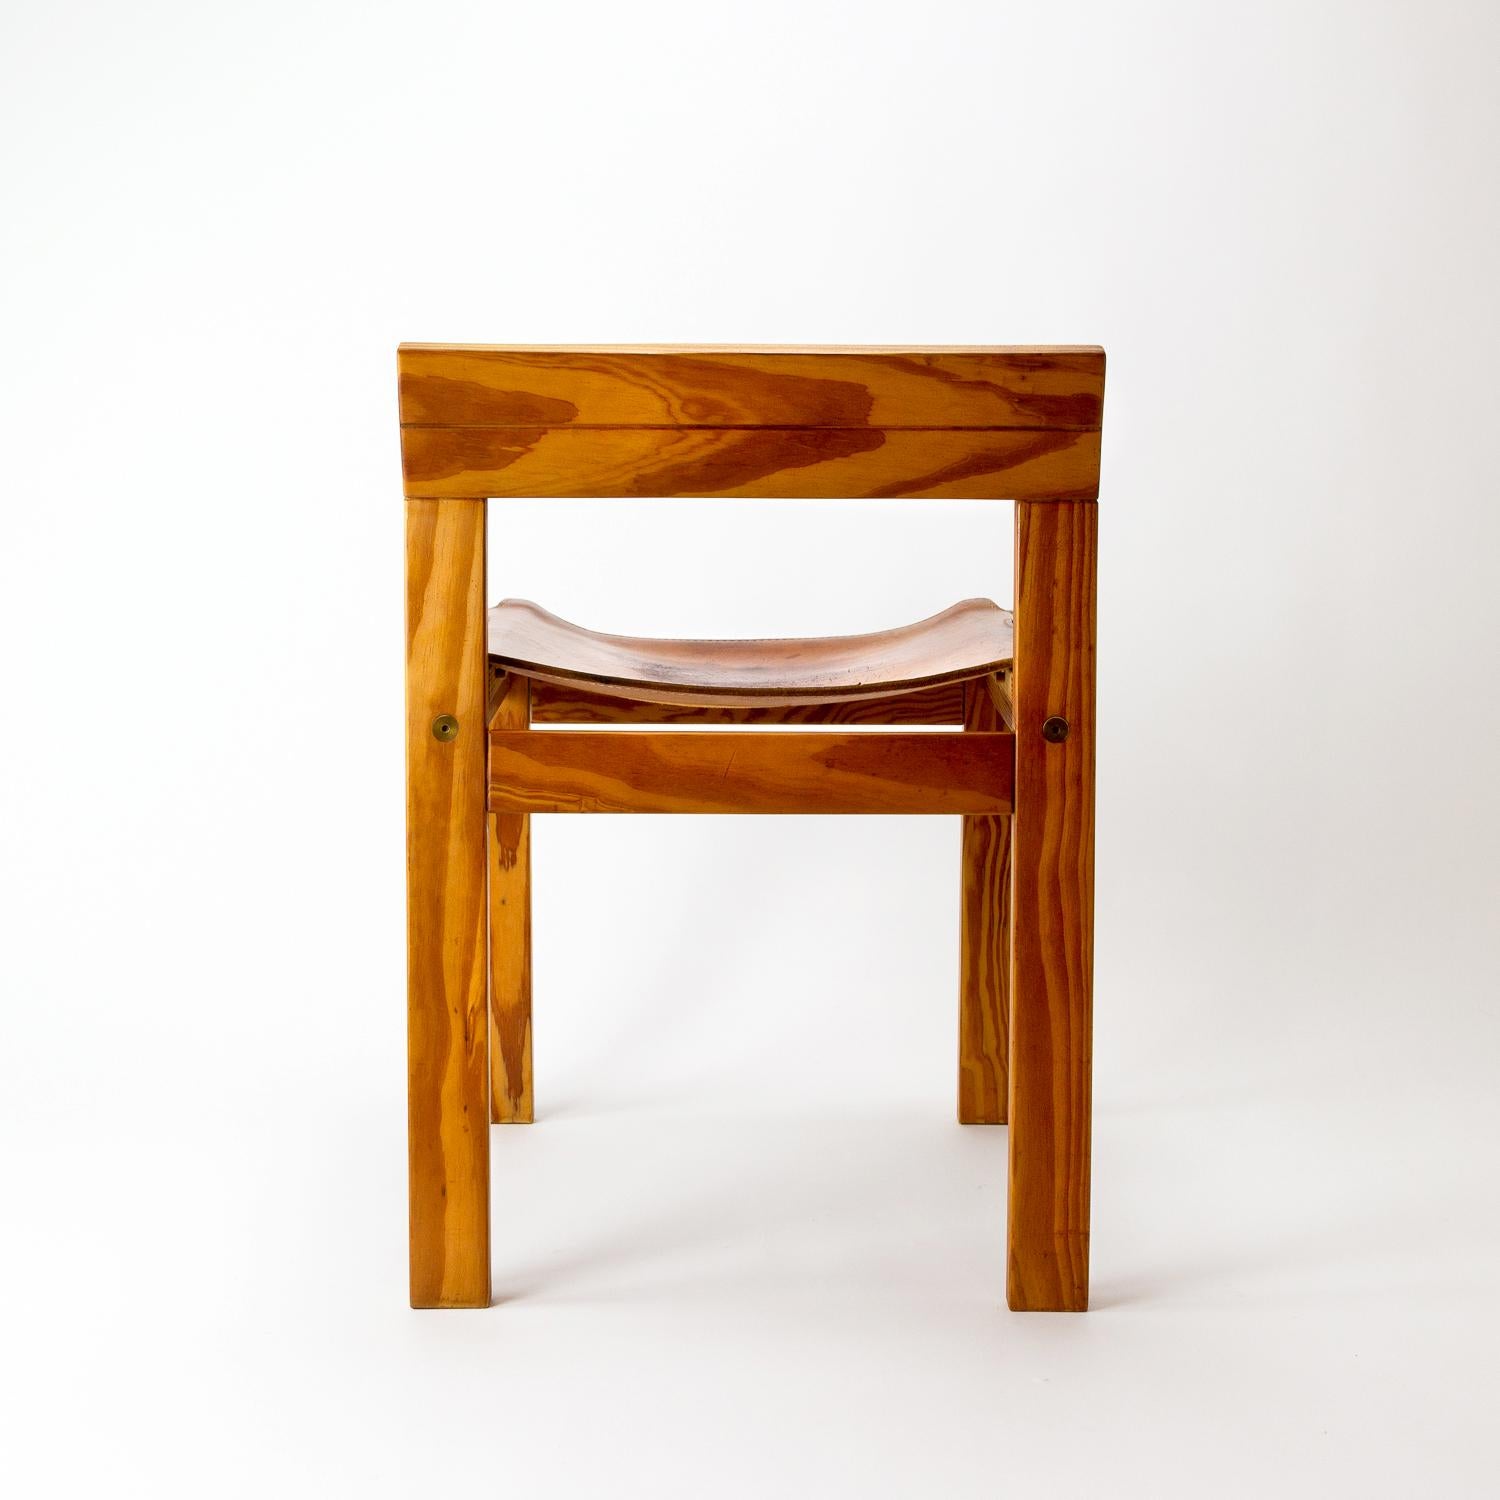 Scandinavian Modern Pitch Pine and Cognac Leather Side Chair, Denmark, 1970s For Sale